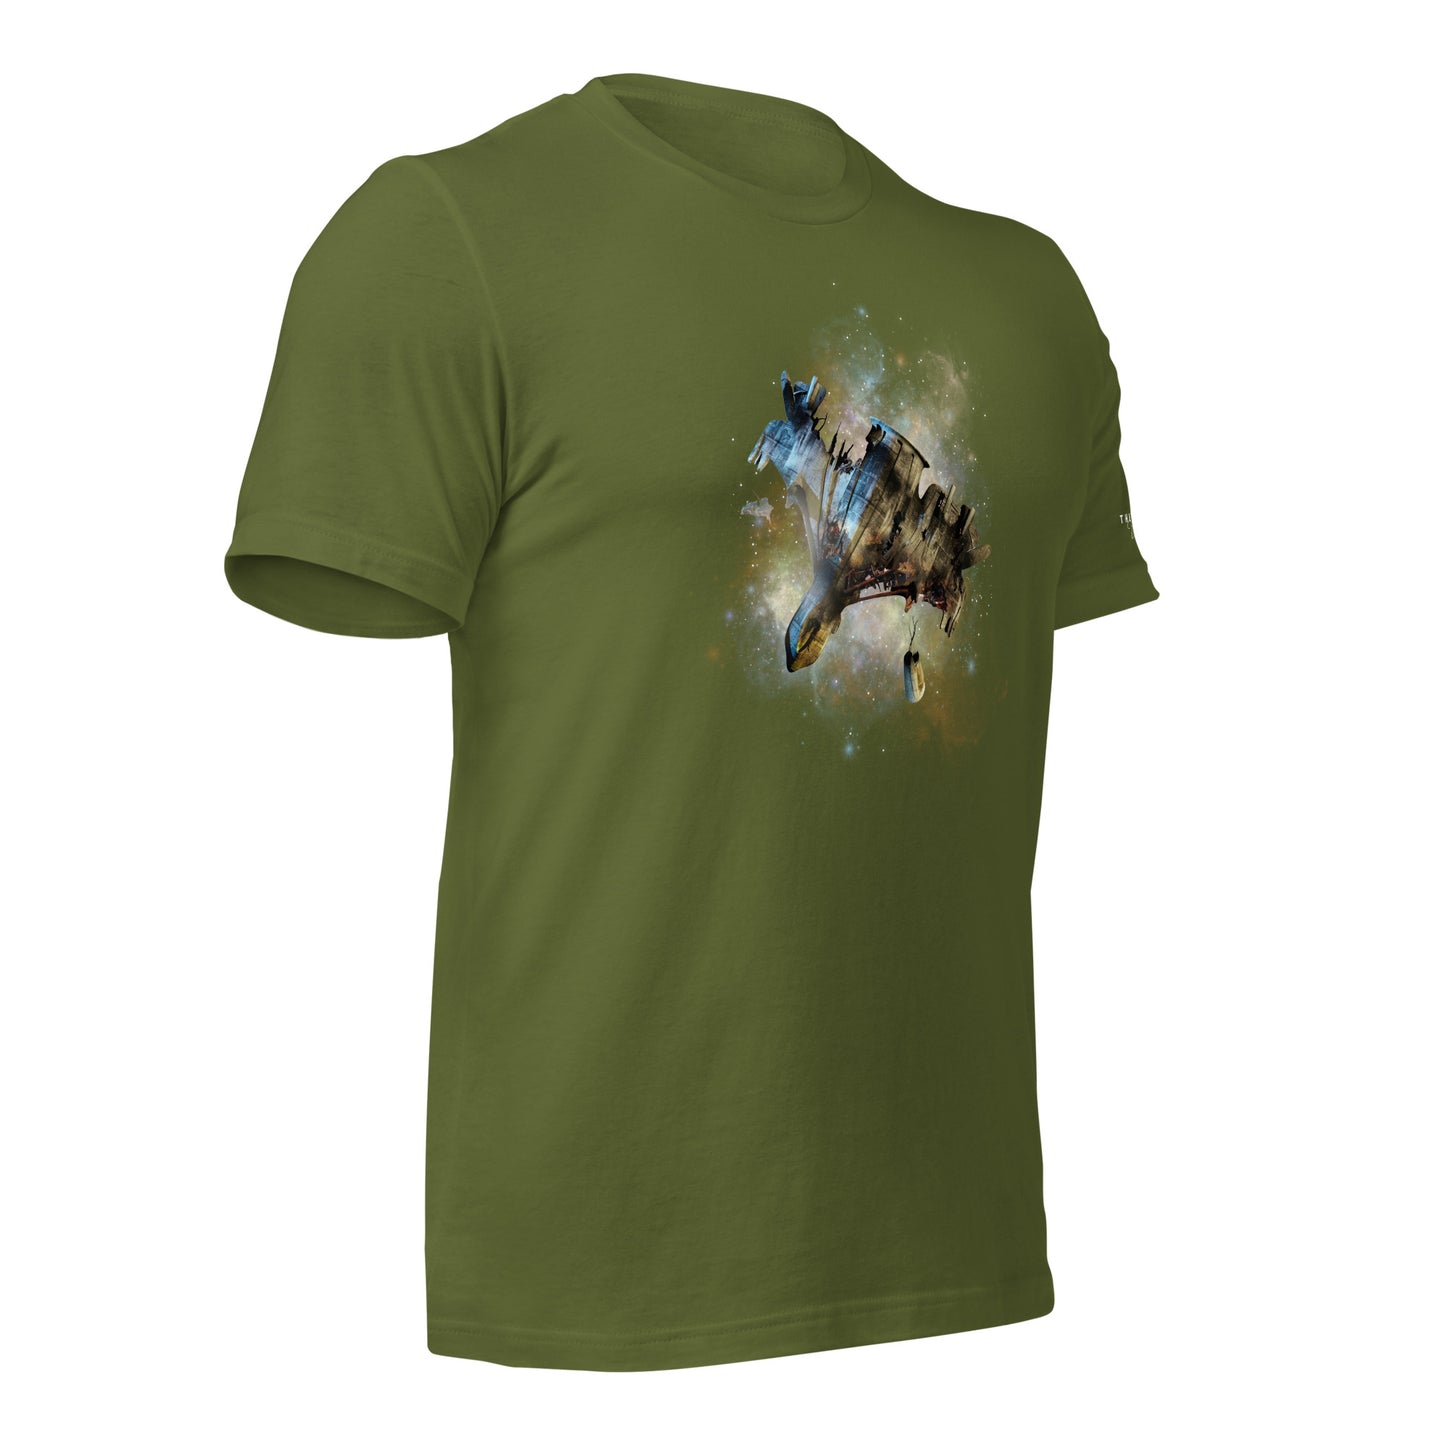 SPACESHIP WRECK T-Shirt - The Diving Universe by Kristine Kathryn Rusch